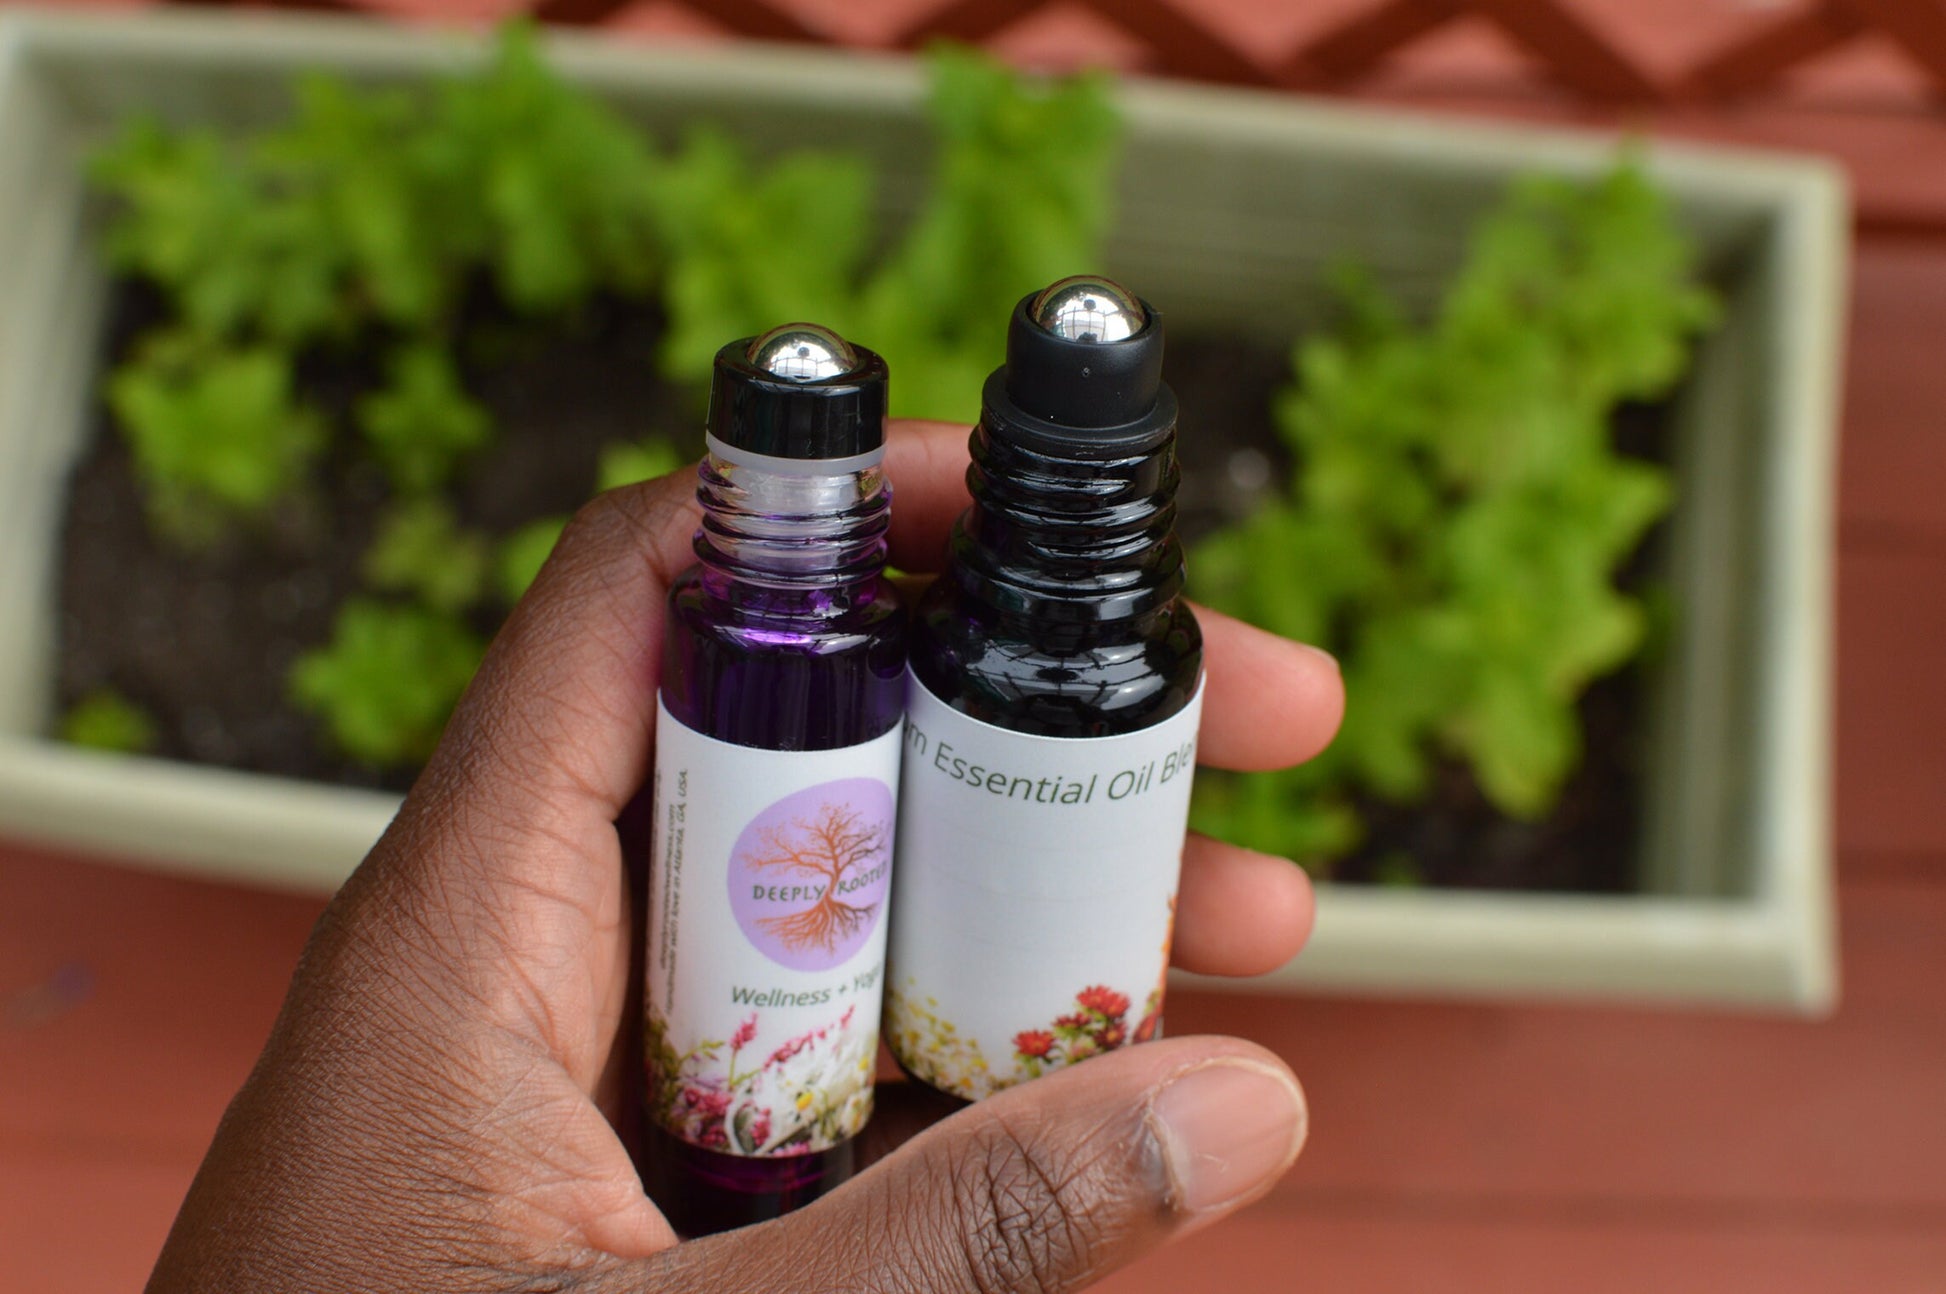 Rescue Respiratory Infection Blend, Essential Oils Deeply Rooted Yoga + Wellness